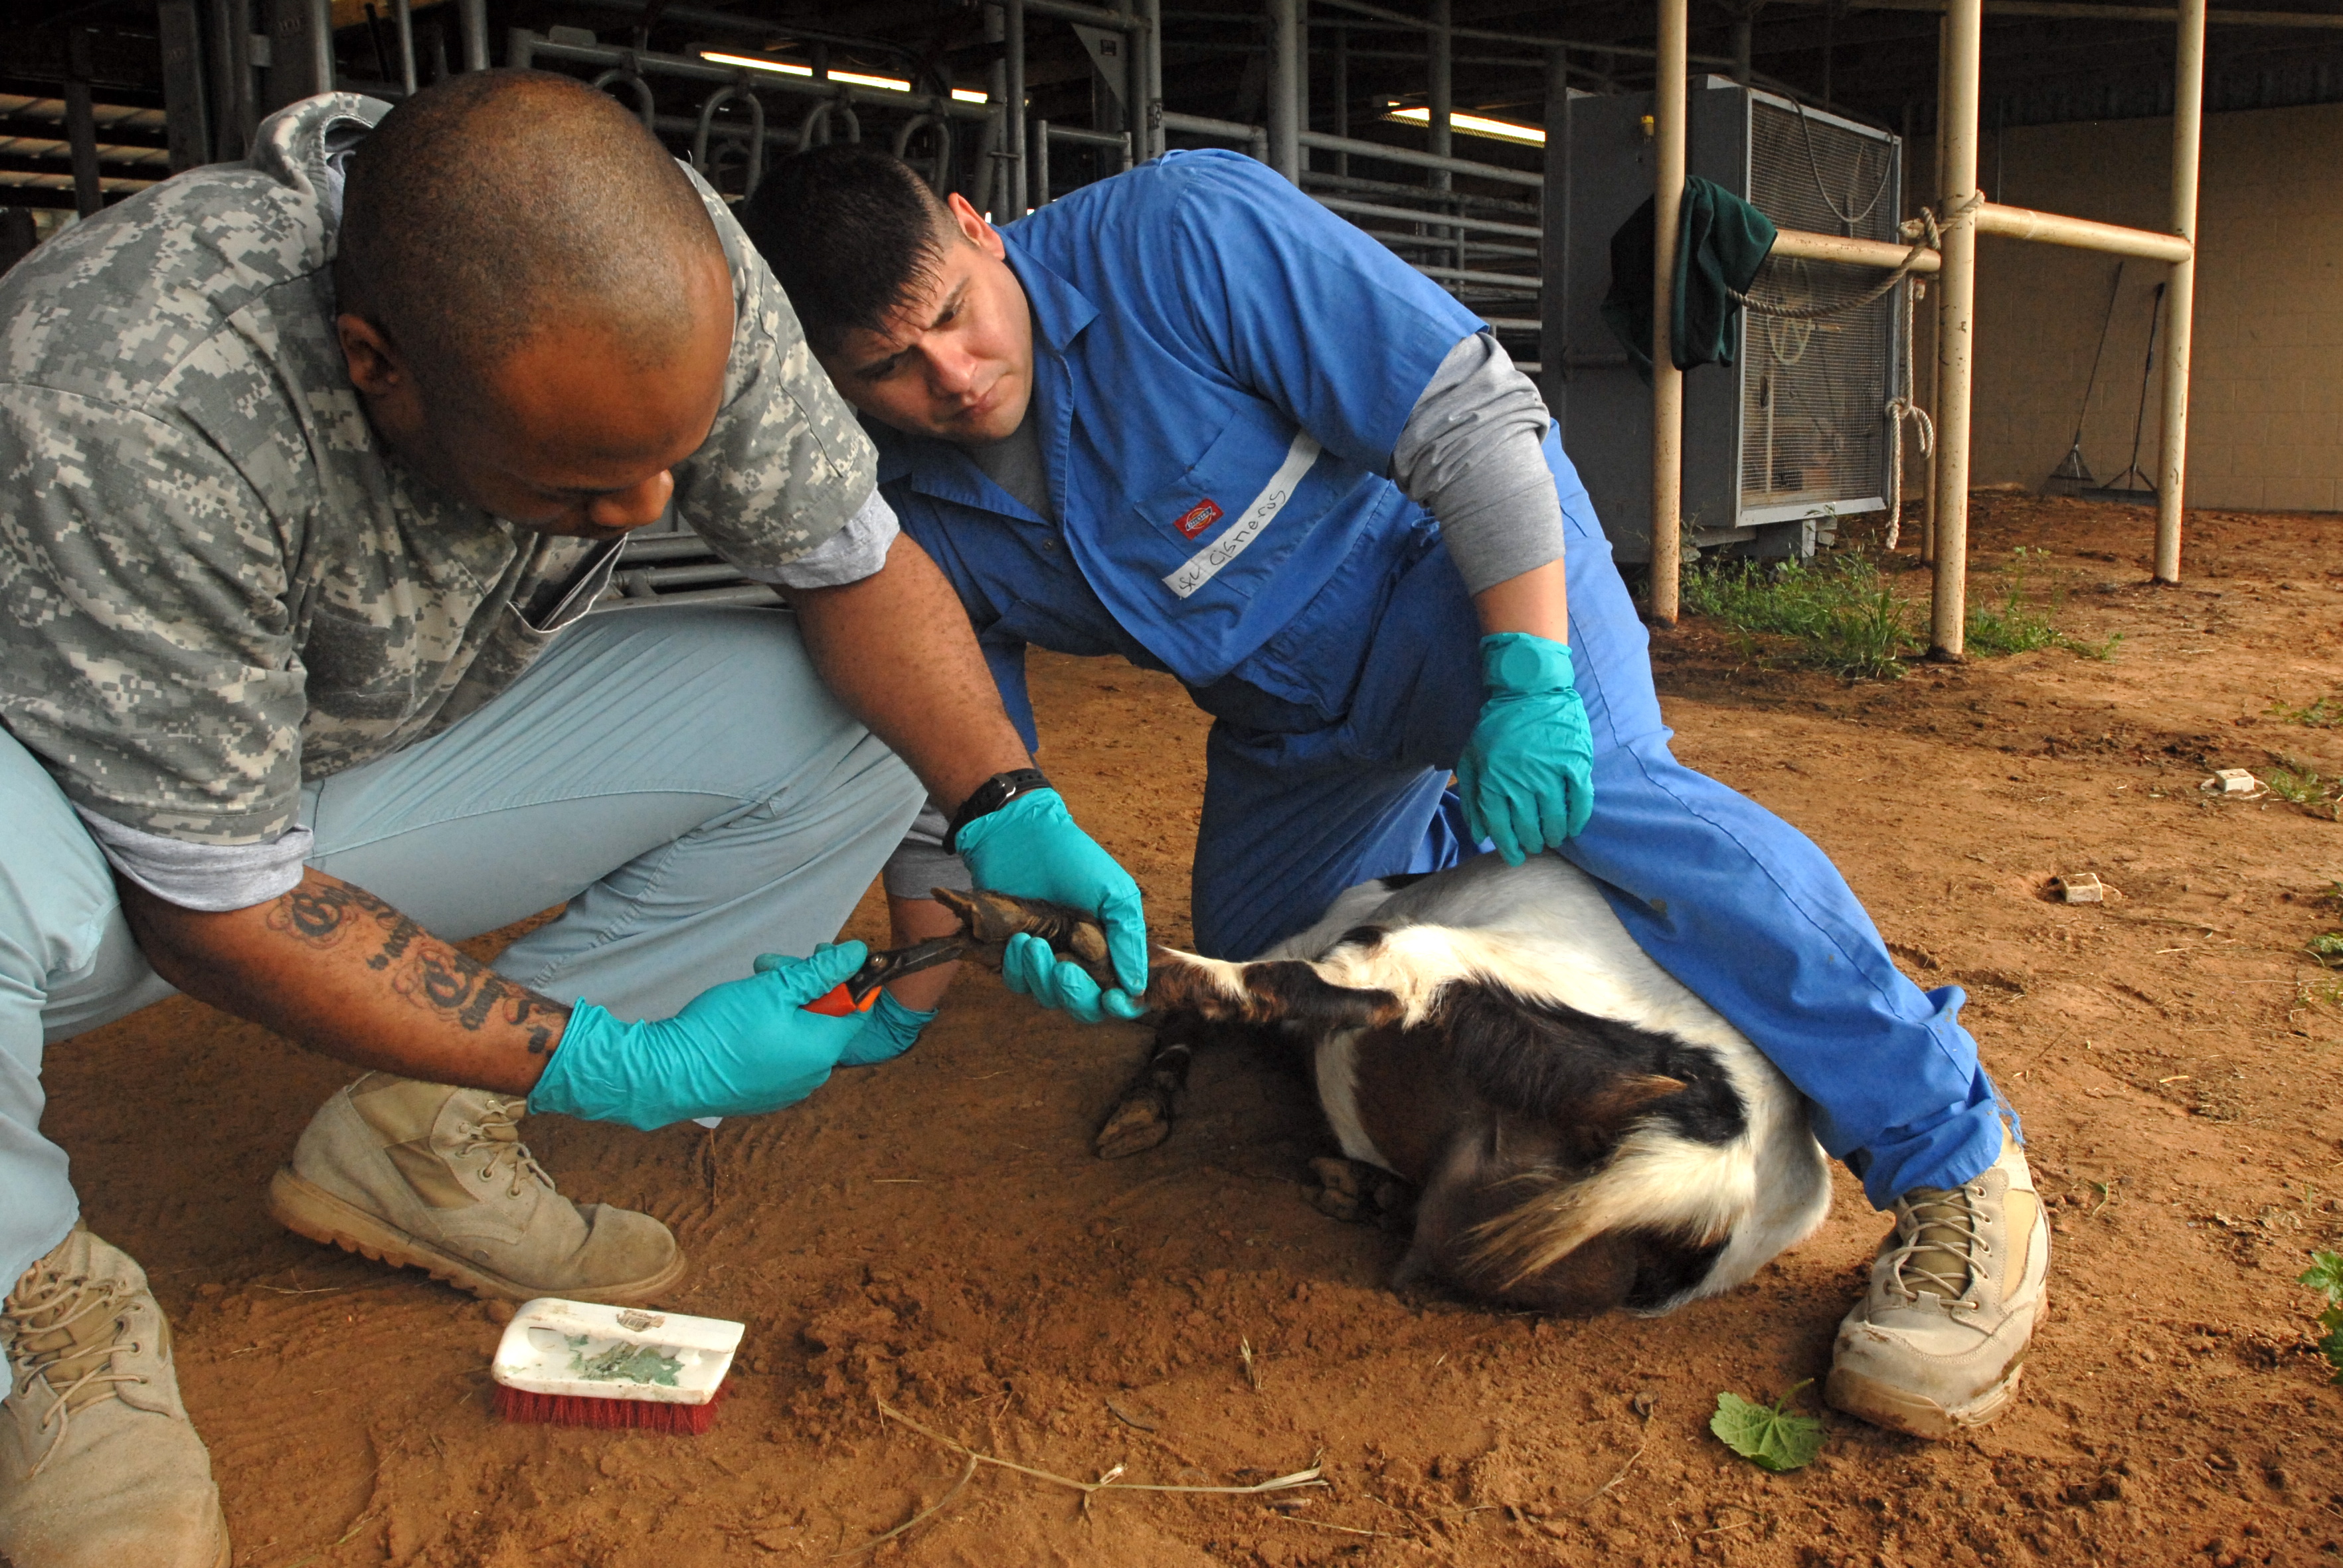 Sgt 1st Class Deontae Karron learns the proper method of trimming a goats hoofs while Sgt. 1st Class Eddie Cisneros properly restrains the goat during this delicate process. During this process a vet must be able to inspect the hoofs for common diseases and bacteria that routinely grows that will result is serious health concerns later down the road for the animal.   Spc. and Spc are two of ten other medically trained Soldiers assigned to the 85th Civil Affairs Brigade who are participating in the Civil Affairs Medical Sergeants Course held at the Veterinarian Medical Park Department at the Texas A&M University. The university partners with the U.S. Army Medical Center and School at Fort Sam Houston to provide critical Civil Affairs training for these future senior medics assigned to 4 person civil affair teams.  After completion from the course, they will be expected to perform a wide variety of duties from food hygiene to vet care, and dentistry within austere environments while. (Photo by Maj. Bryan Woods, 85th Civil Affairs Brigade Public Affairs) 